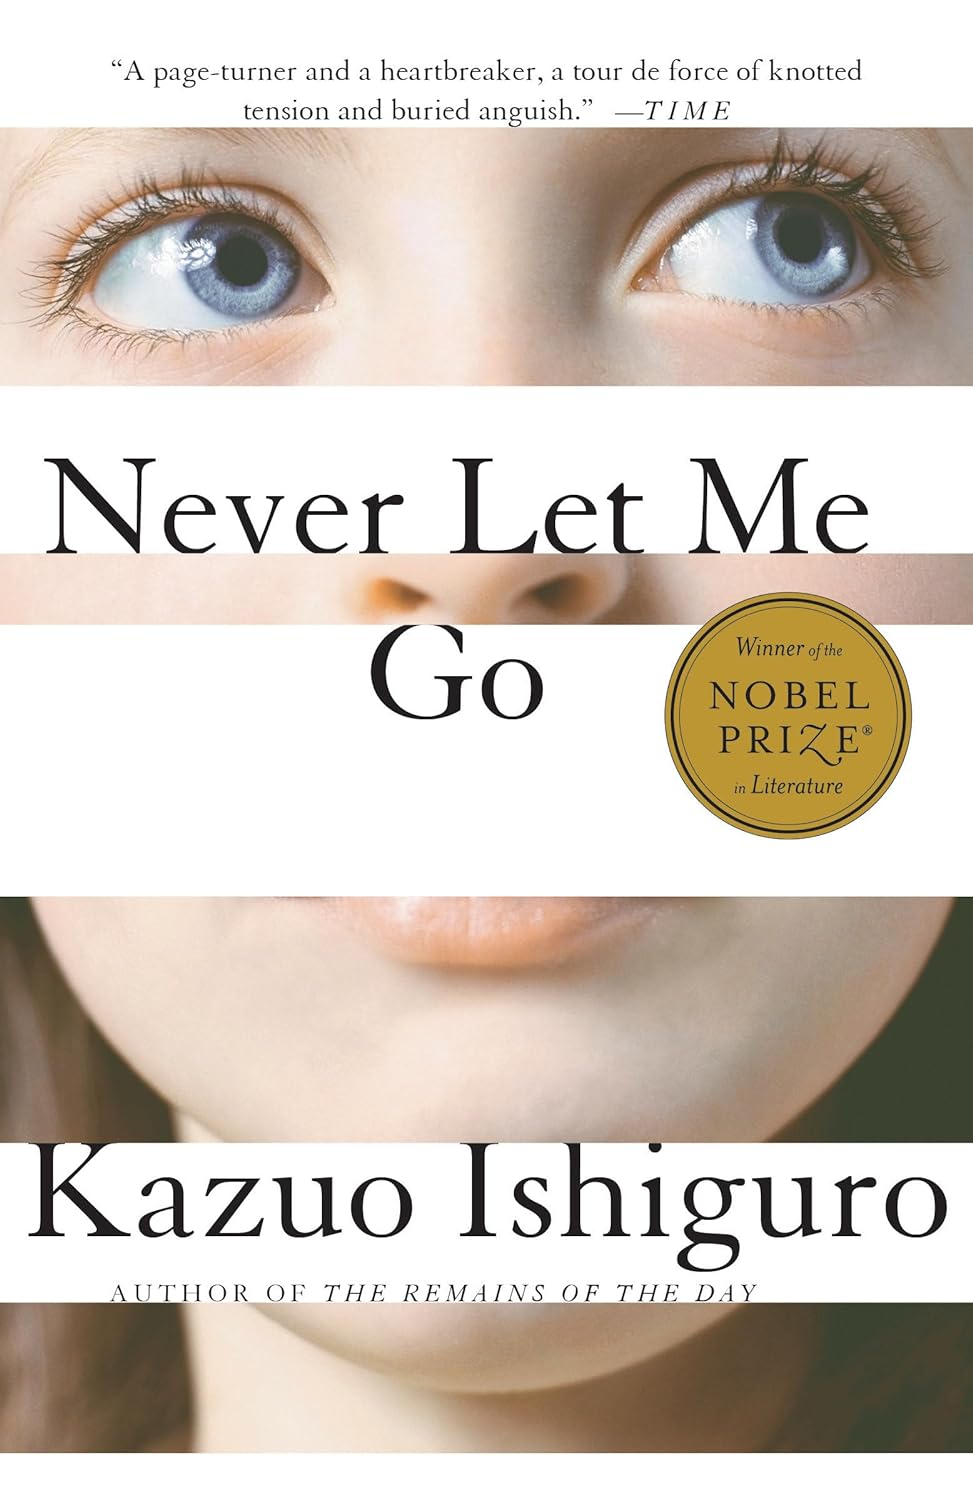 Never Let Me Go by Kazuo Ishiguro (2005)